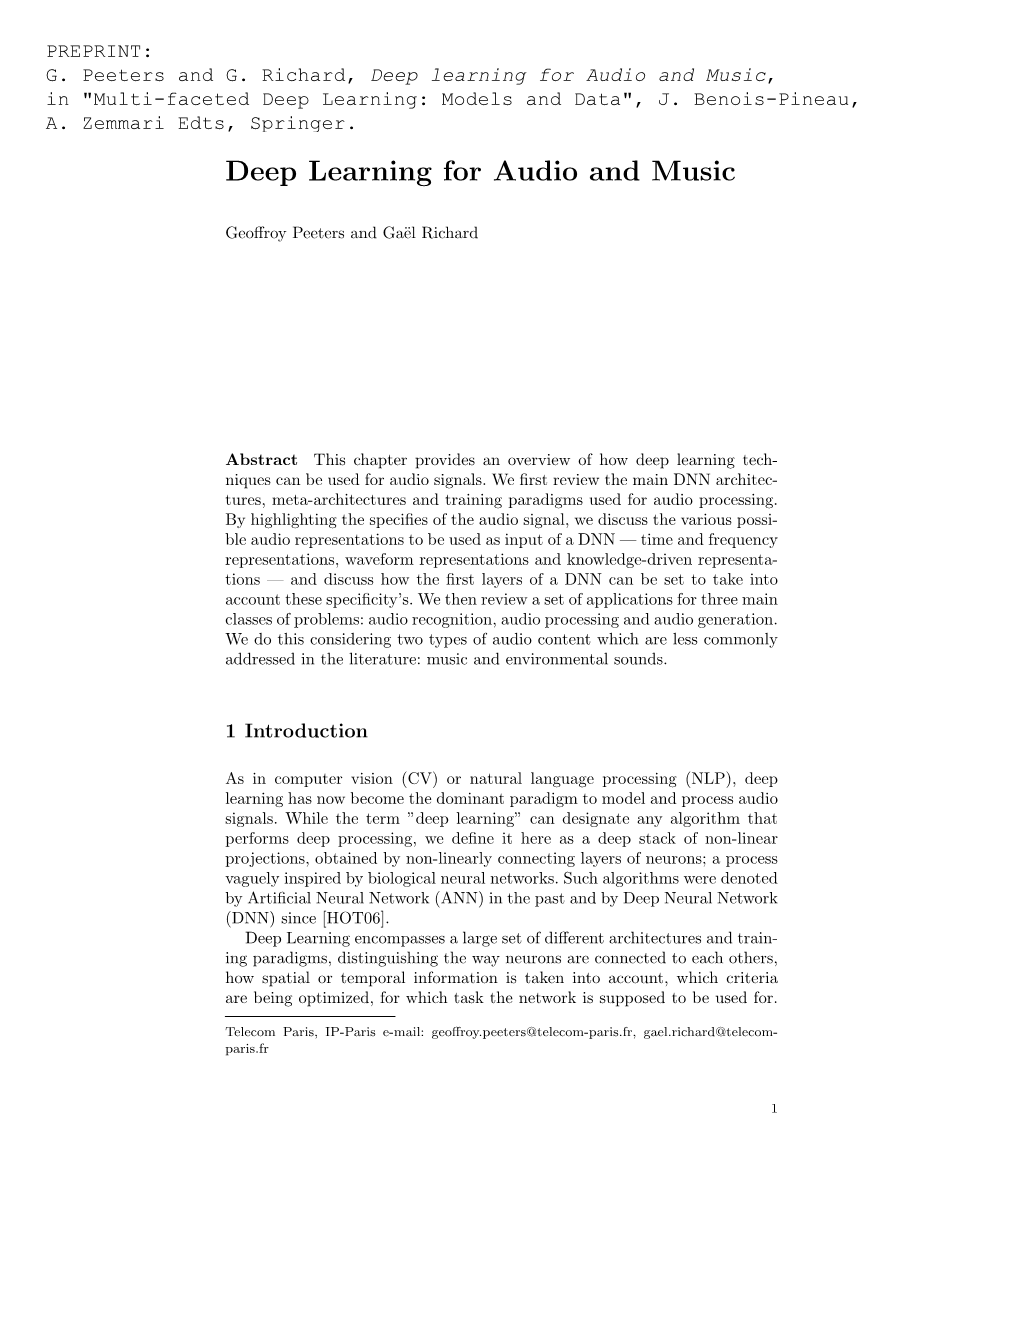 Deep Learning for Audio and Music